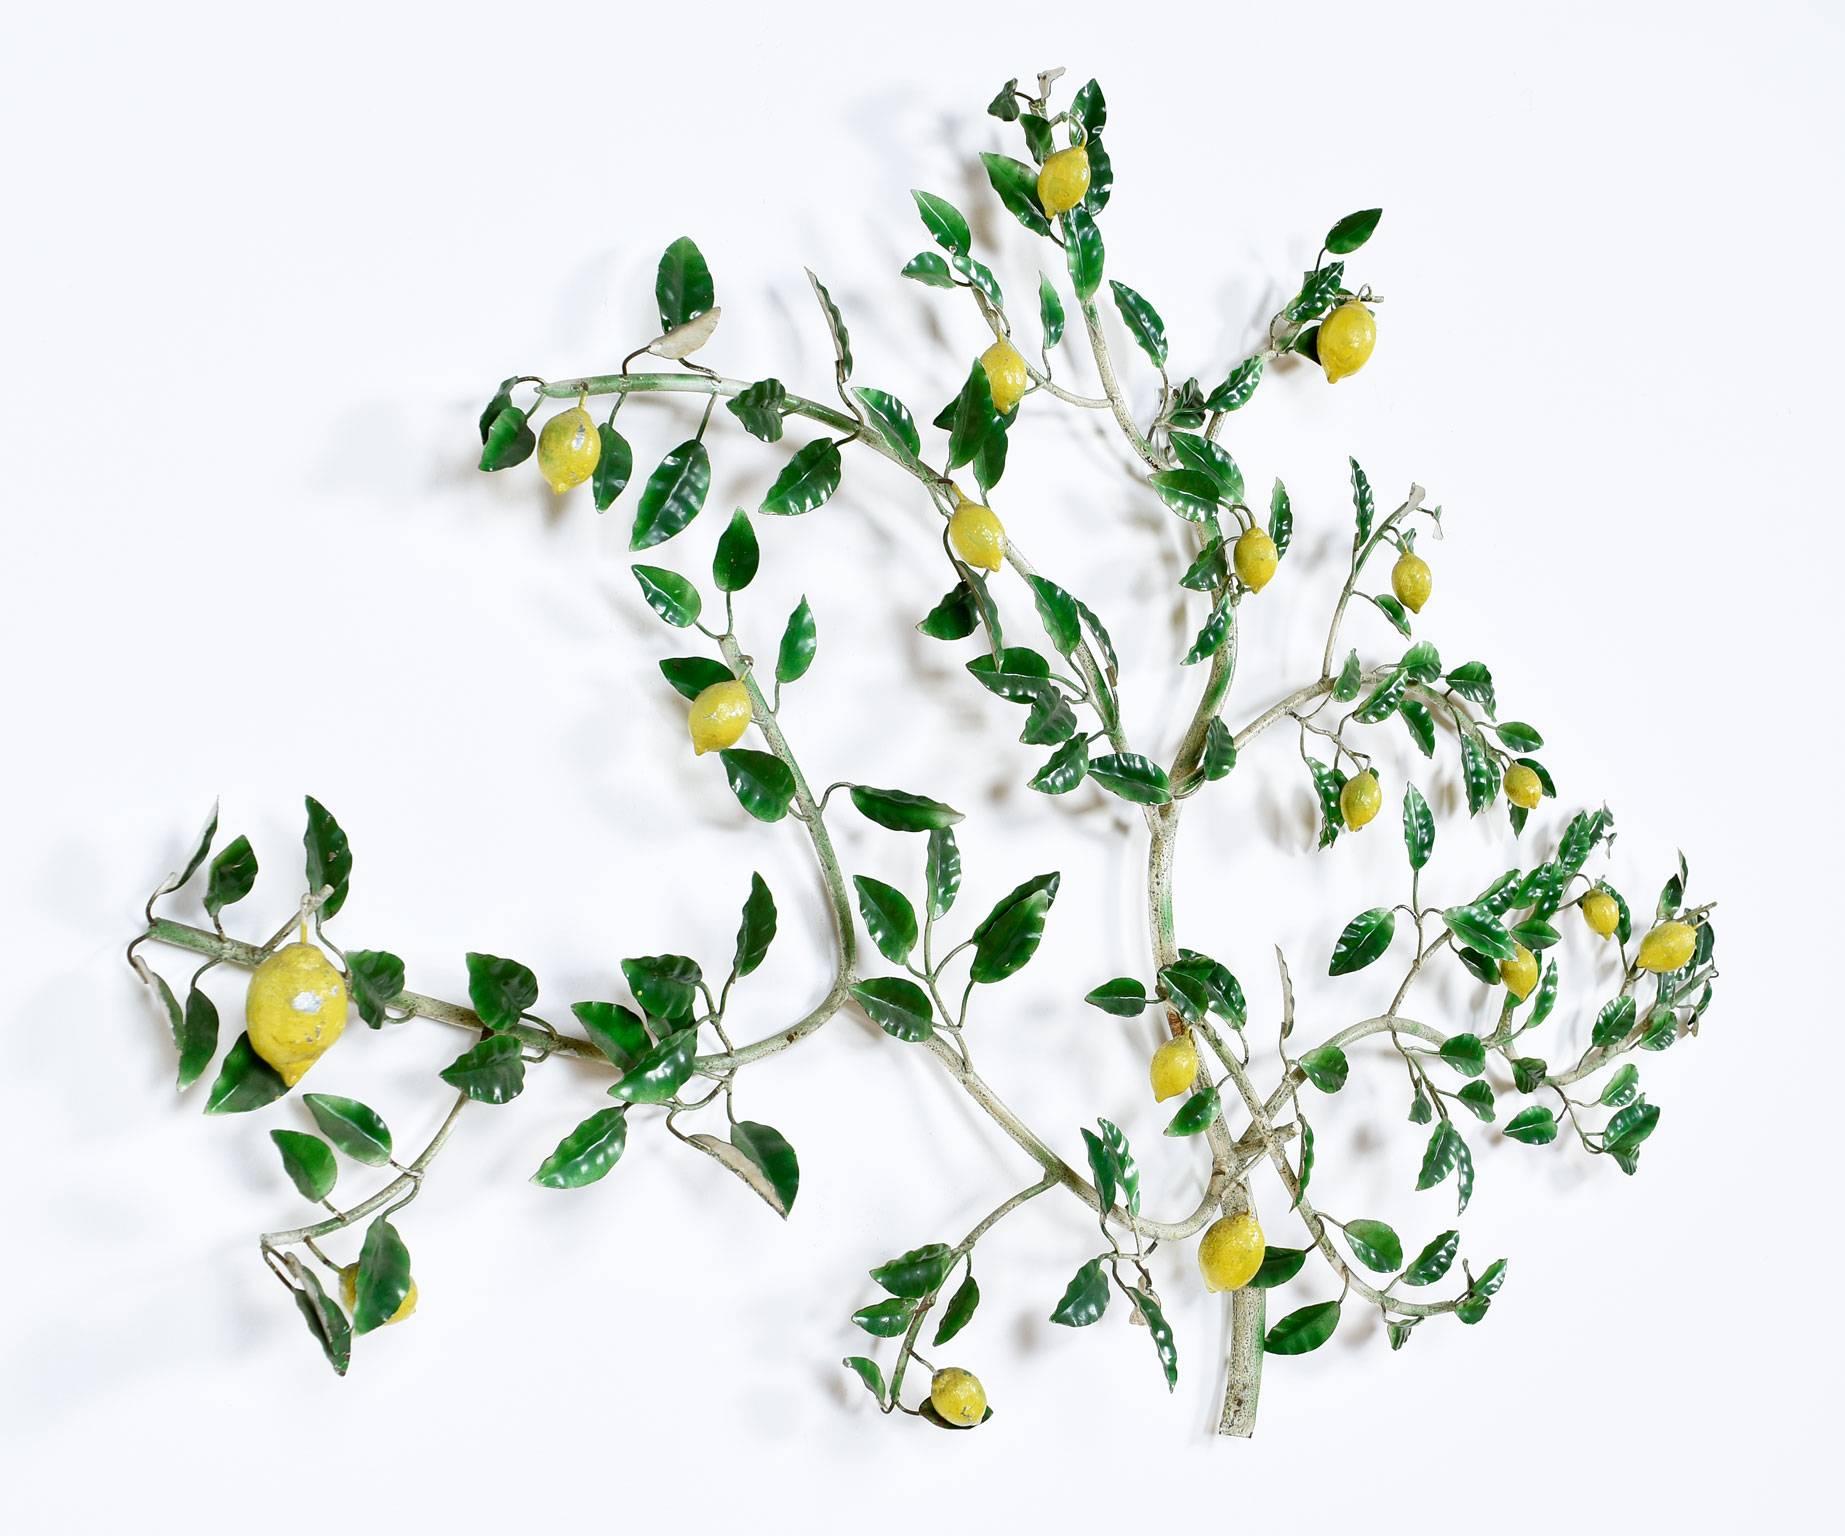 This retro lemon tree tole wall sculpture was made in Italy and is constructed of painted metal. A romantic design with sprawling branches and leaves. More whimsical than the glitzy Curtis Jere pieces of the period. Vintage 1960s, a time when